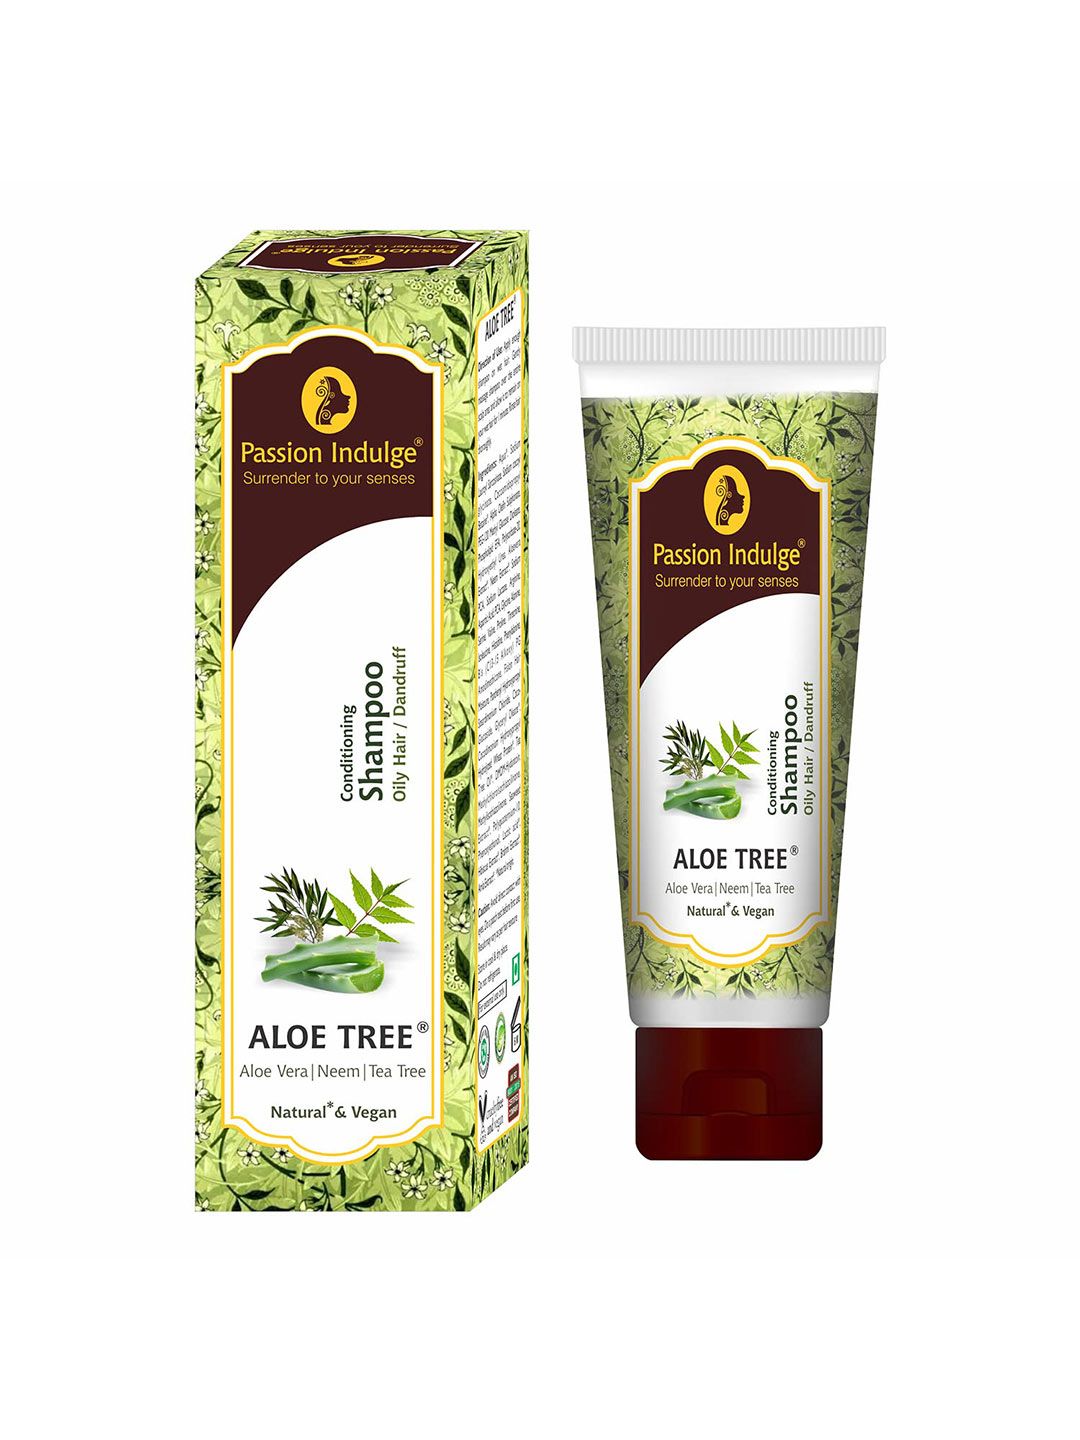 Passion Indulge Aloe Tree Shampoo for Oily Scalp and Hair Dandruff  200 ml Price in India